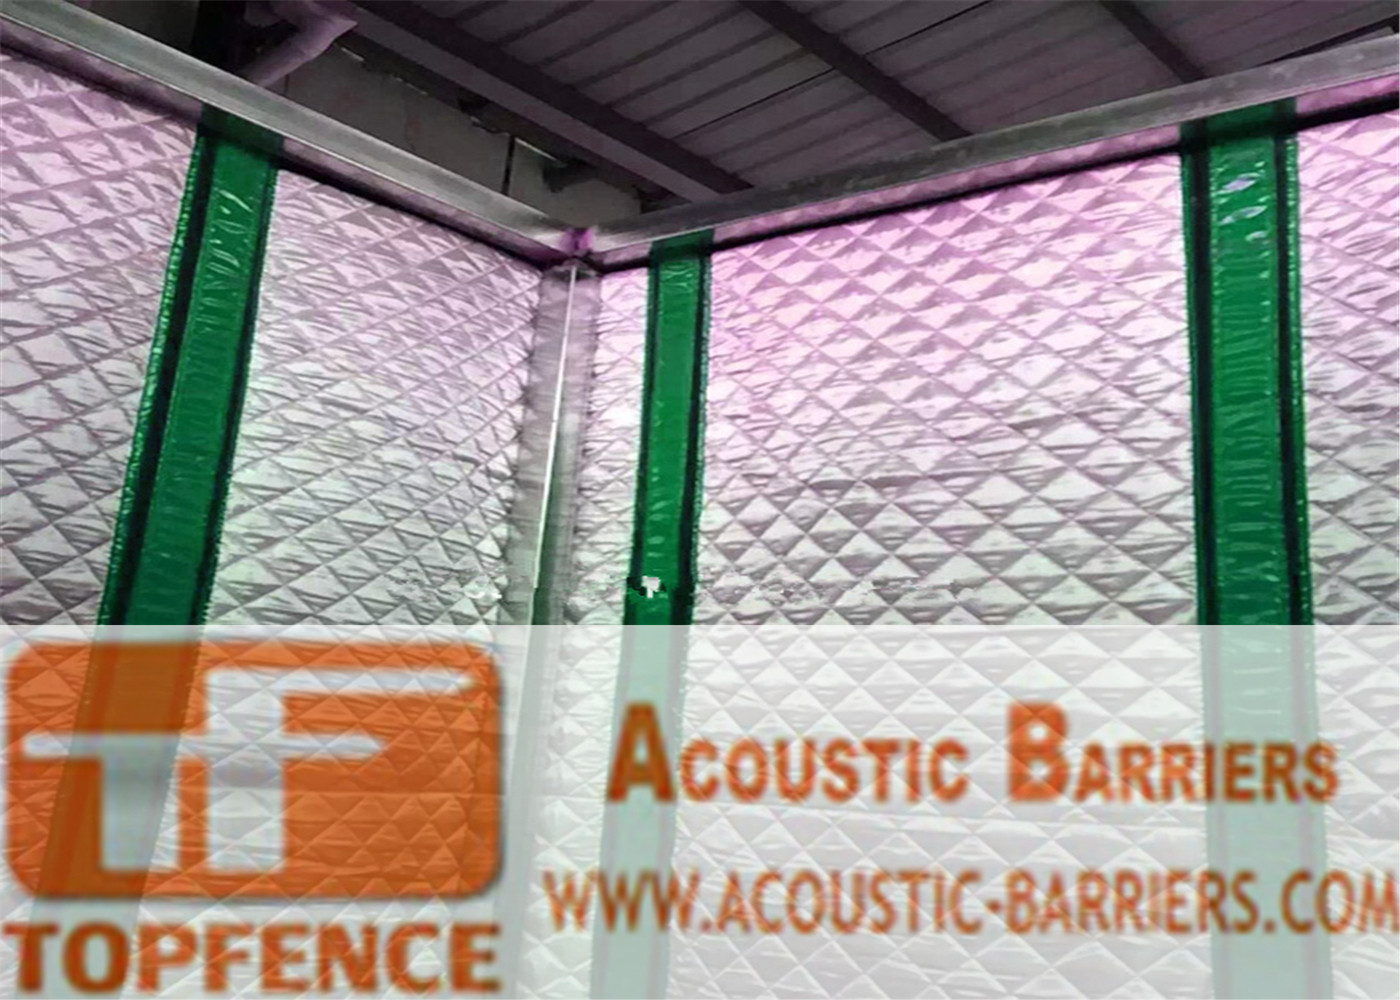  Temporary Sound Barriers Fence 40dB noise Industrial Acoustic Curtains Waterproof Acoustic Sound Barrier Manufactures